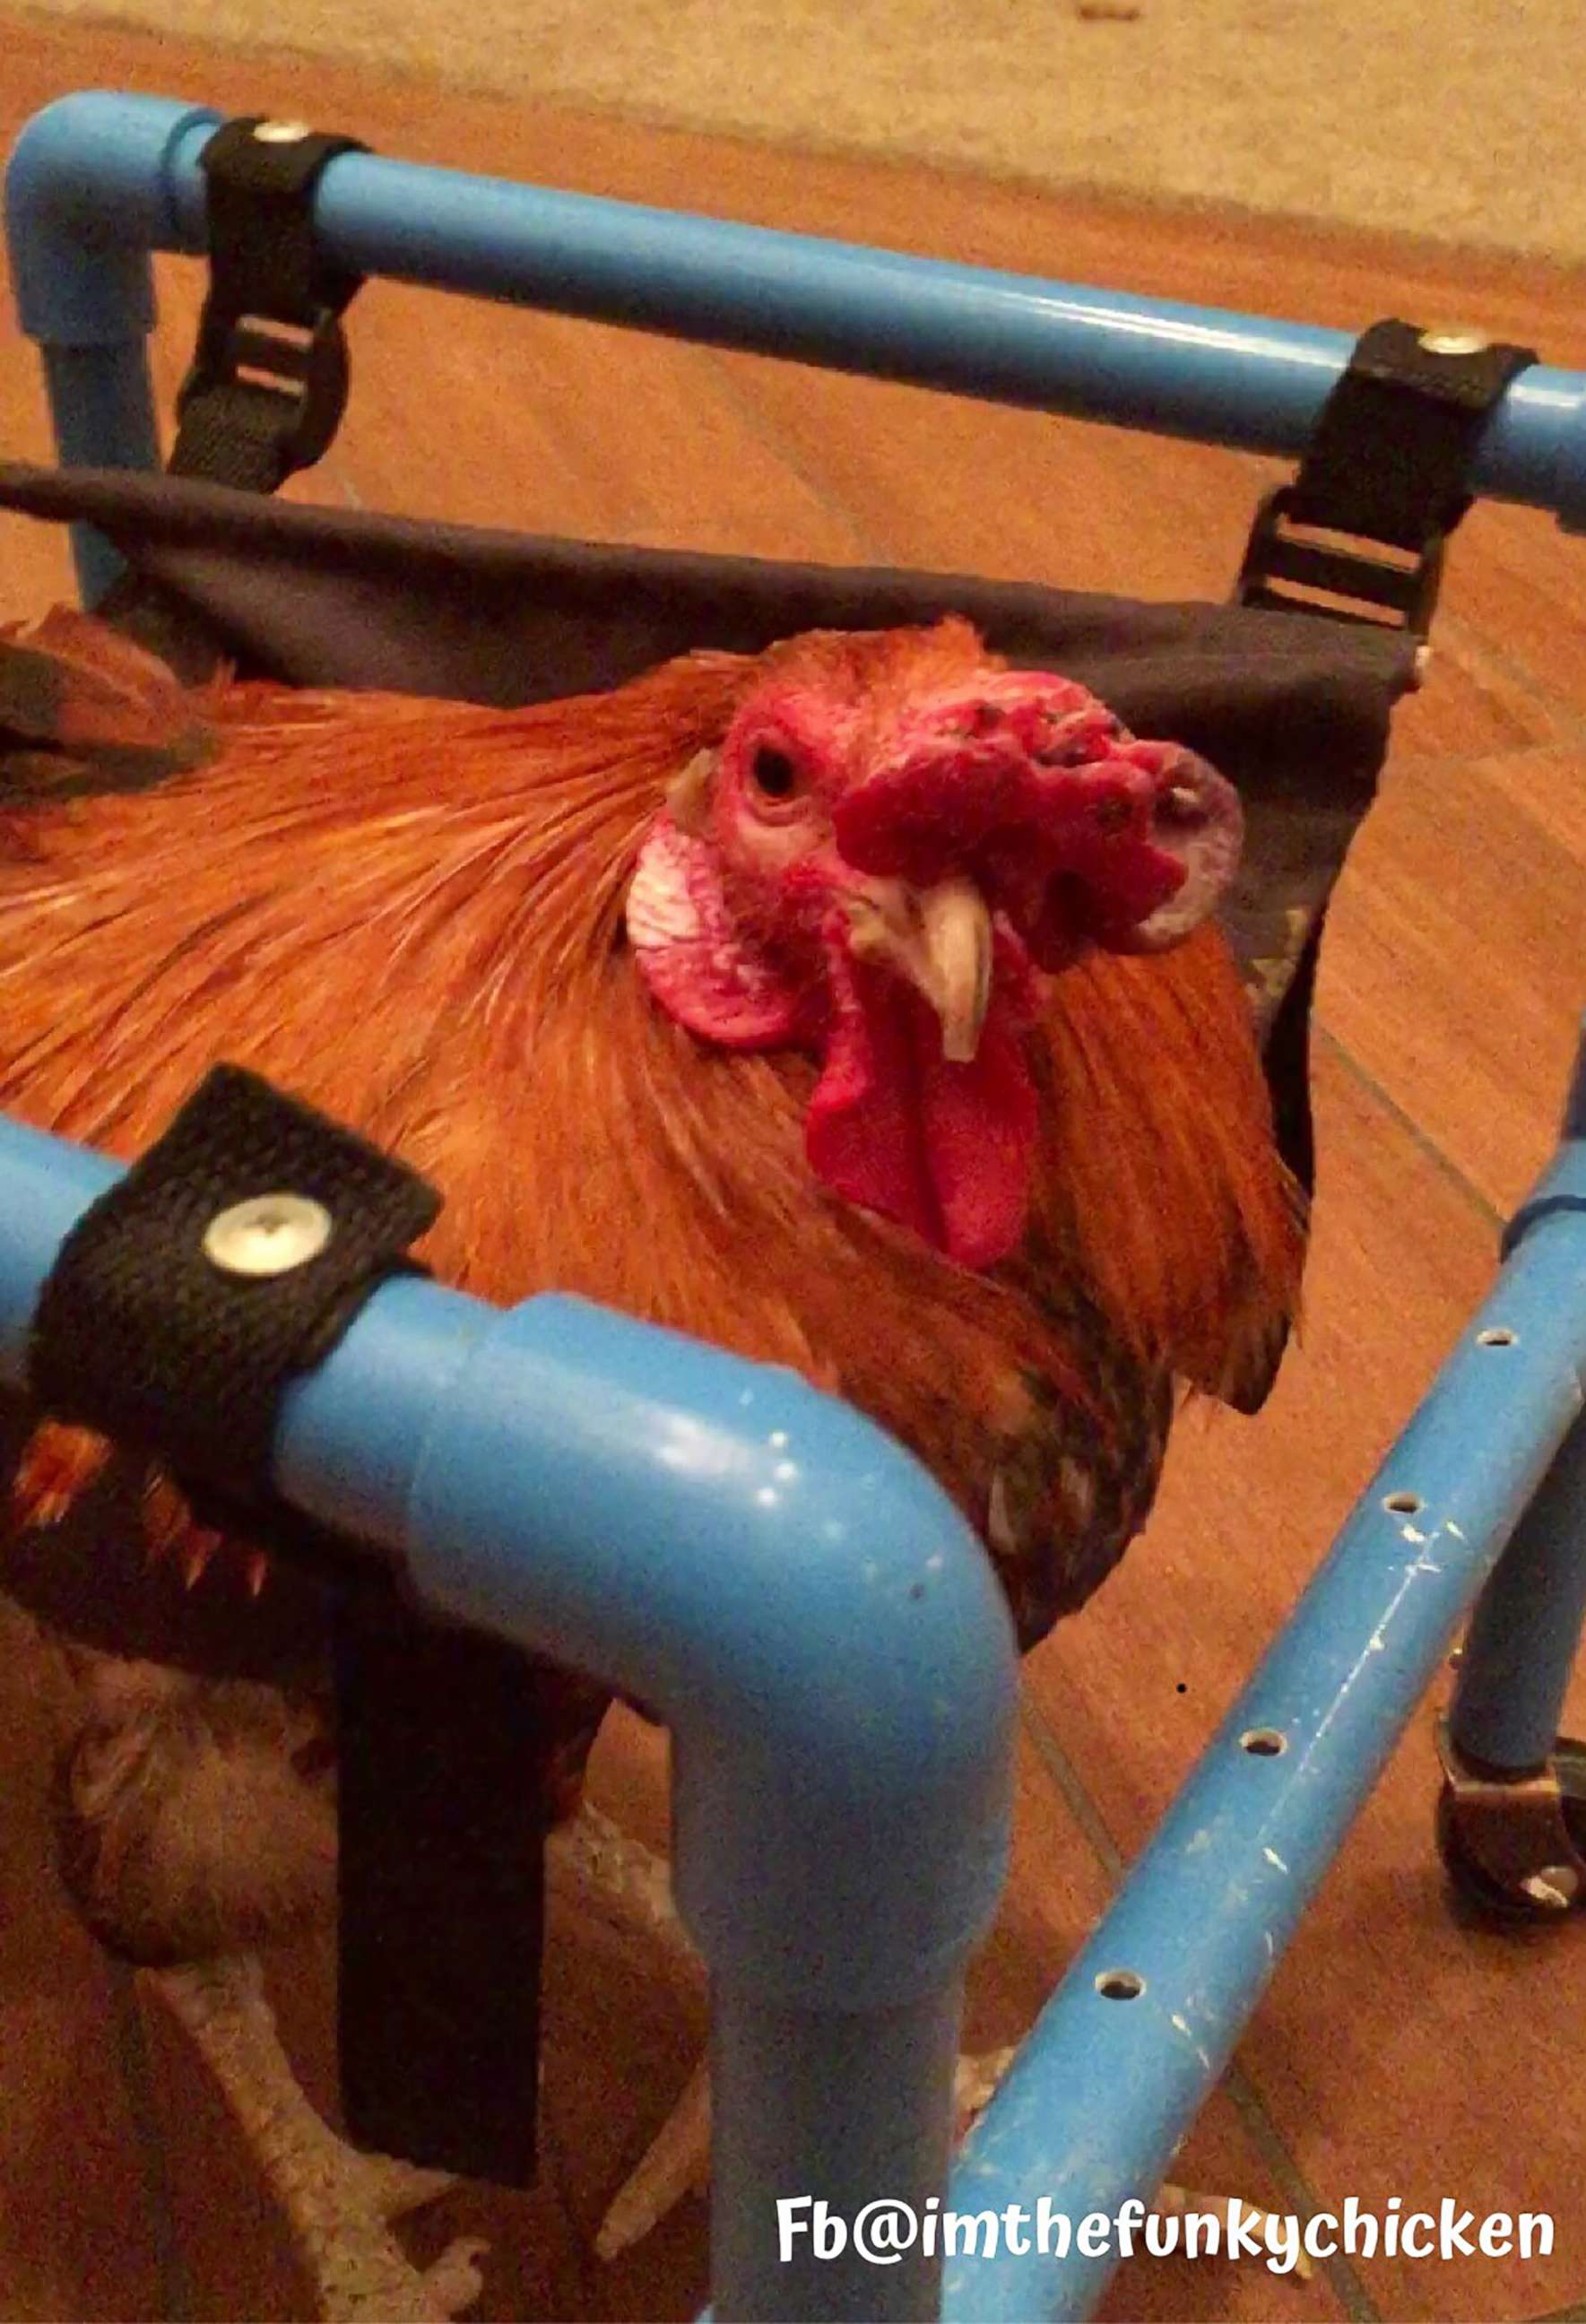 PHOTO: Roo was injured in a fight with a rooster, leaving him to recover in a therapy wheelchair.